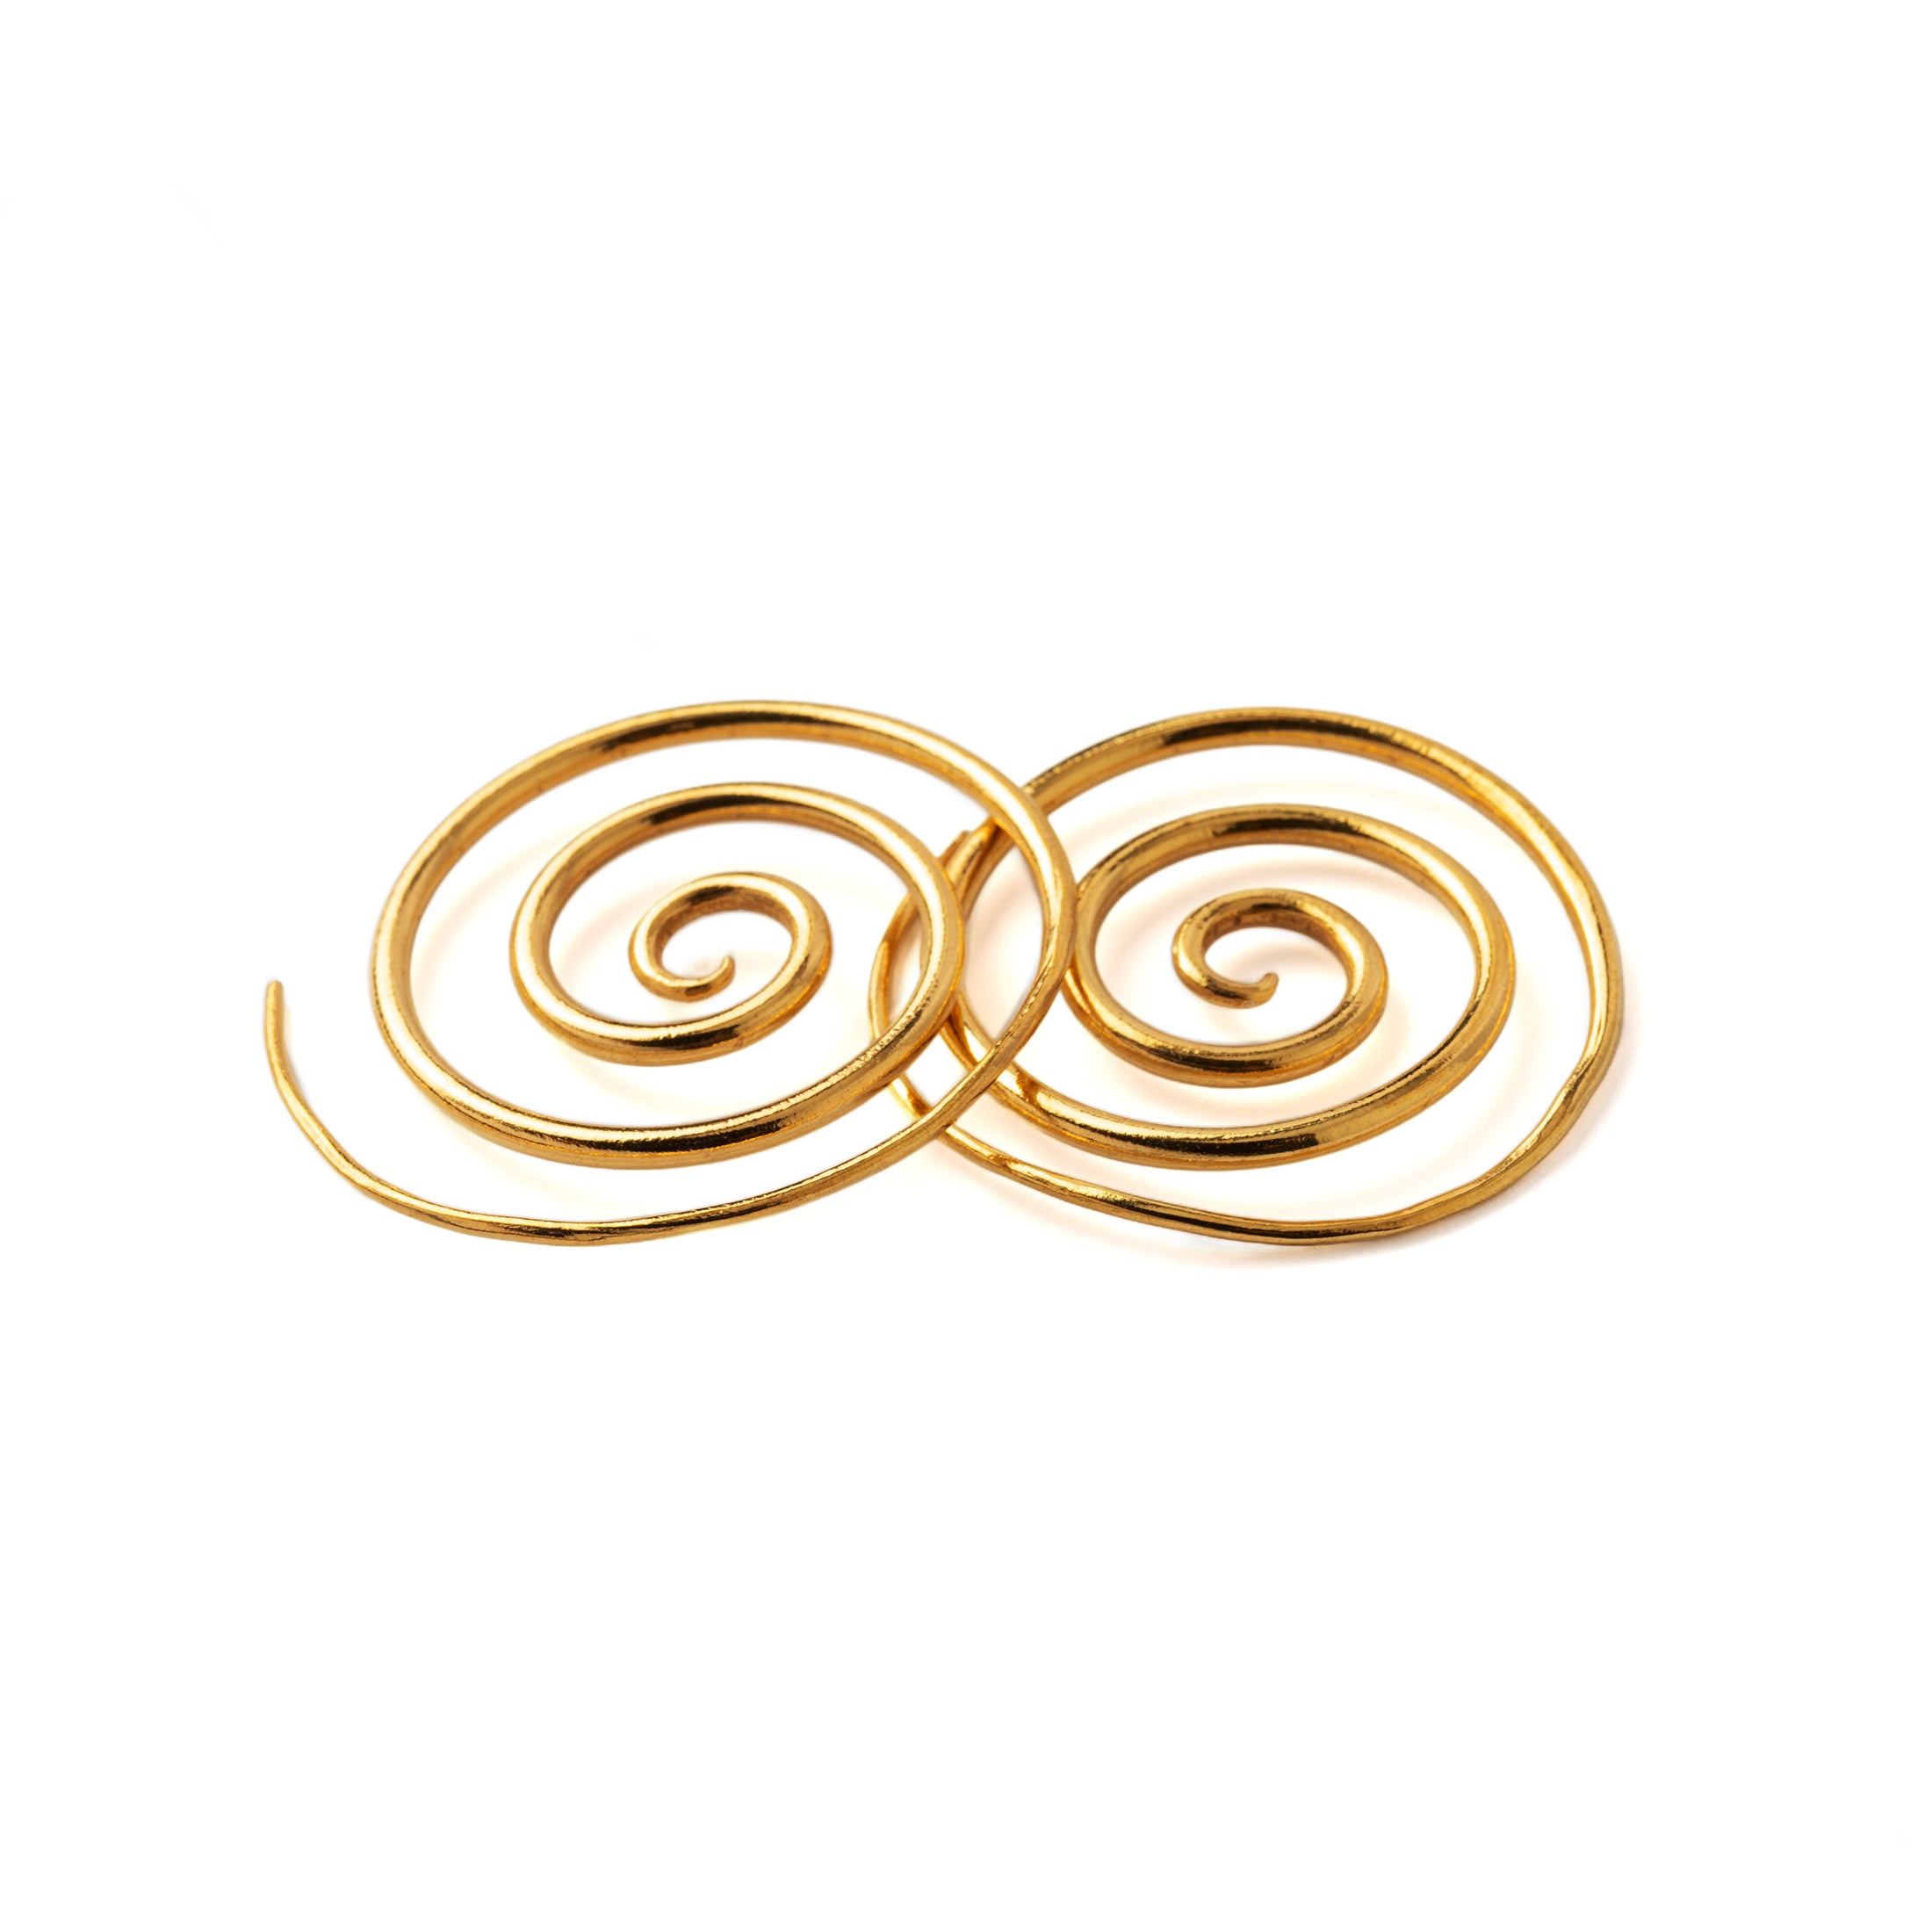 Super Spiral Gold Earrings front and side view